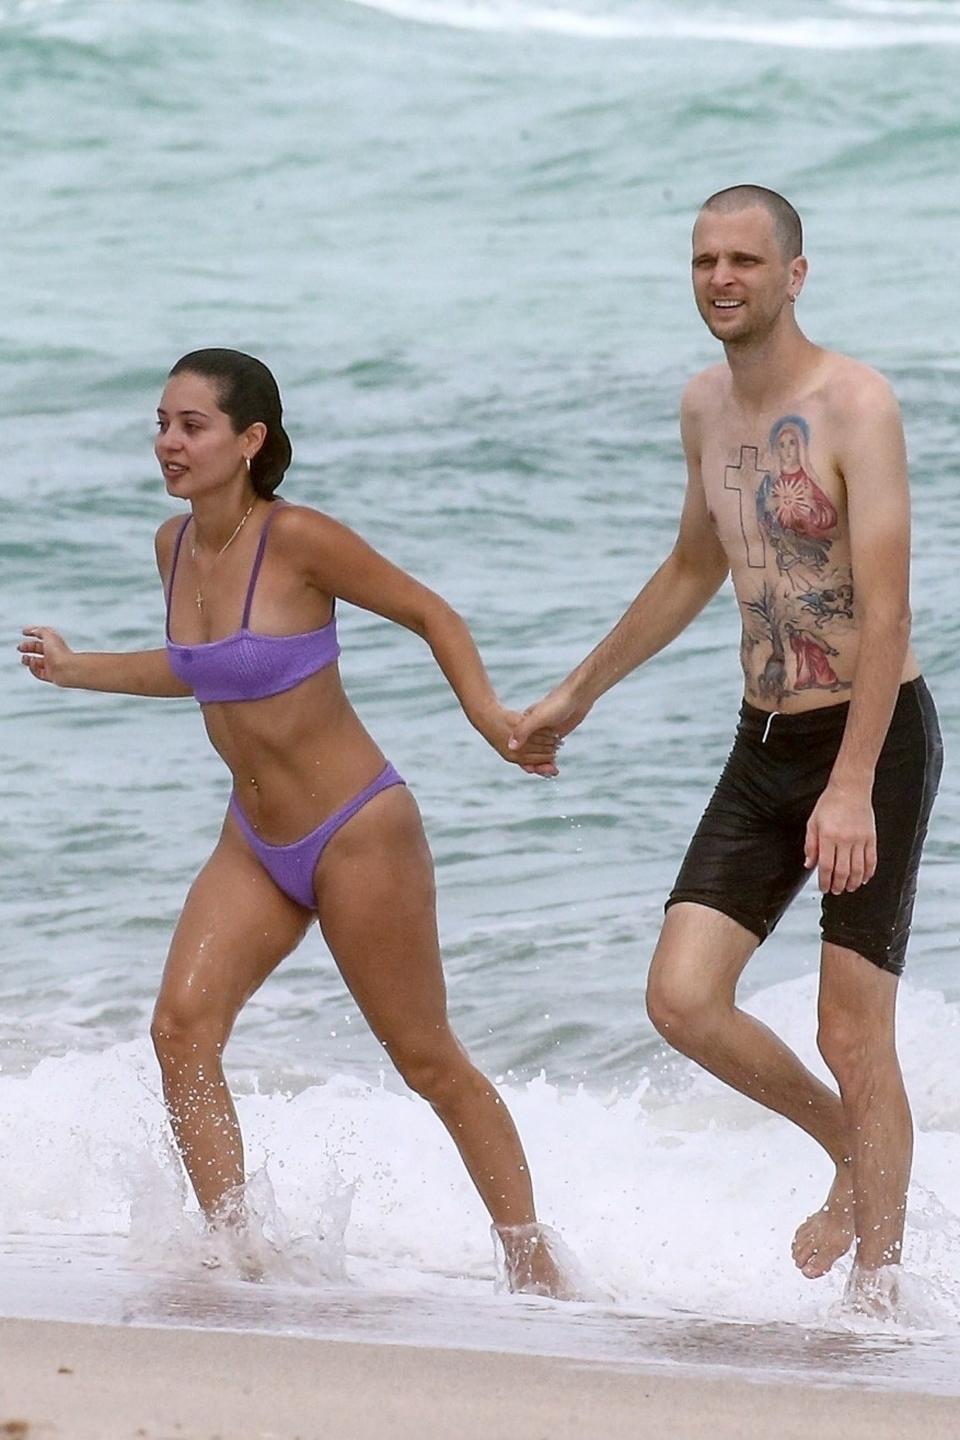 the couple getting out of the ocean